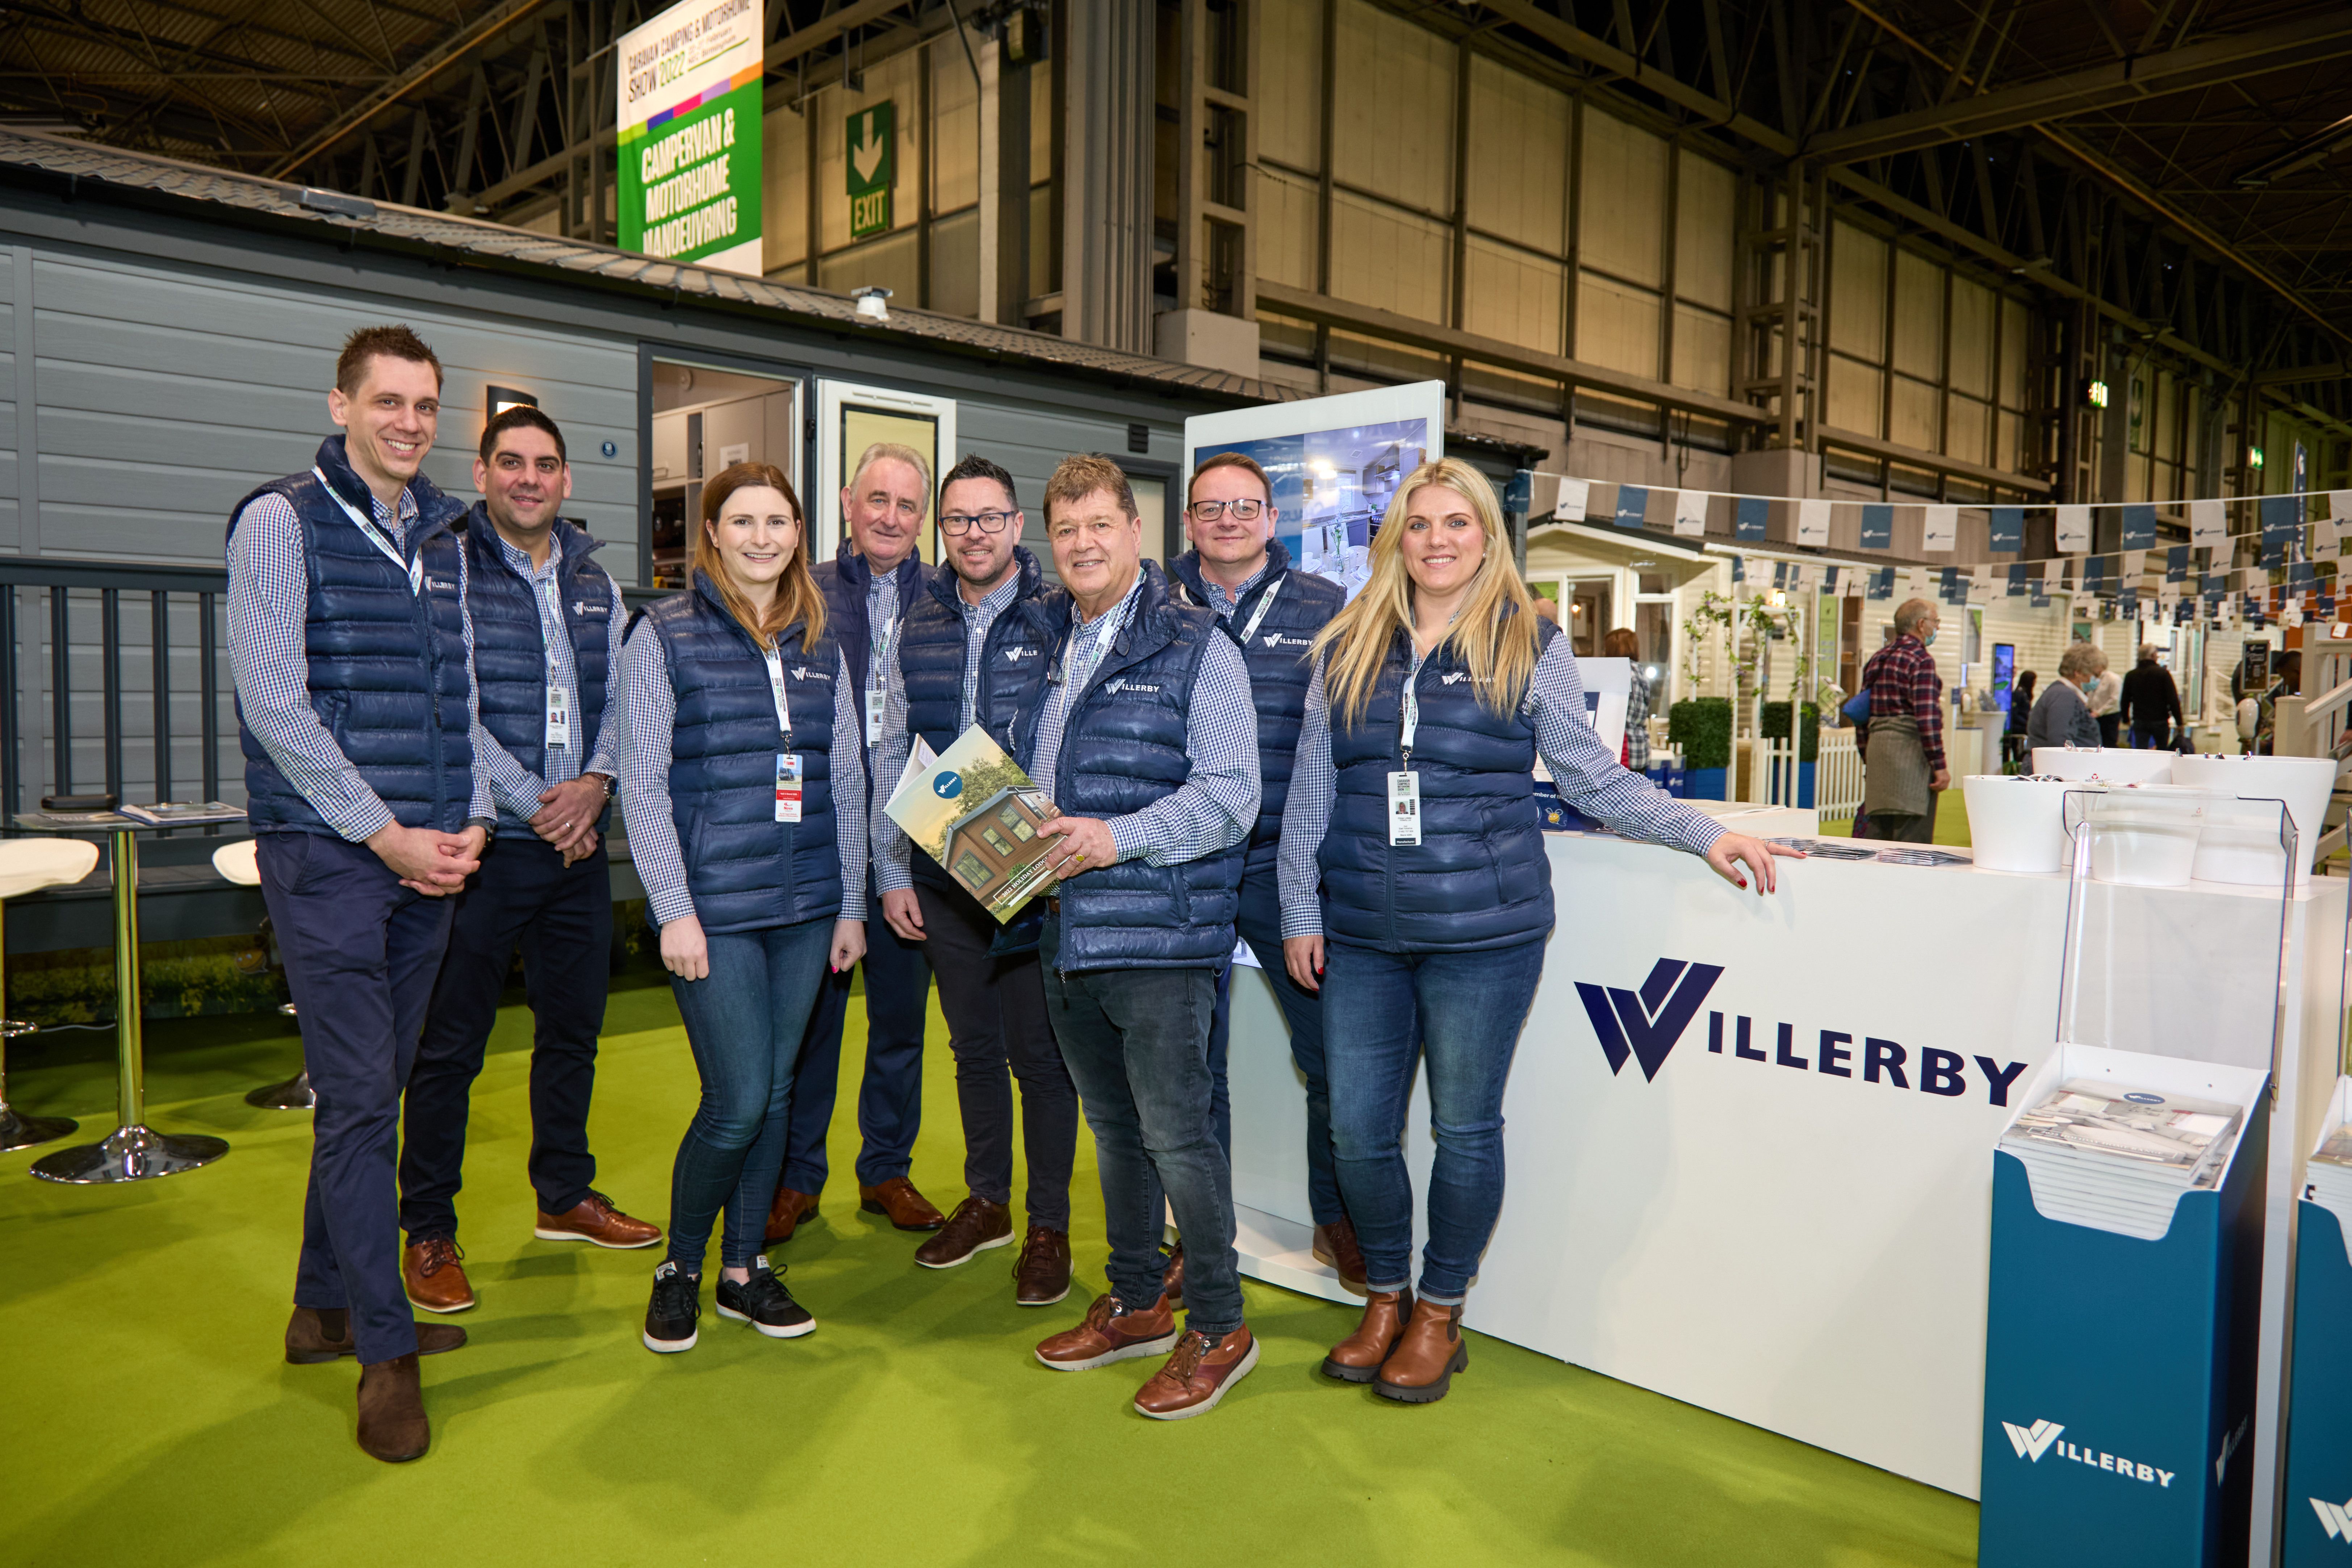 The Willerby team at the Caravan, Camping and Motorhome show 2022